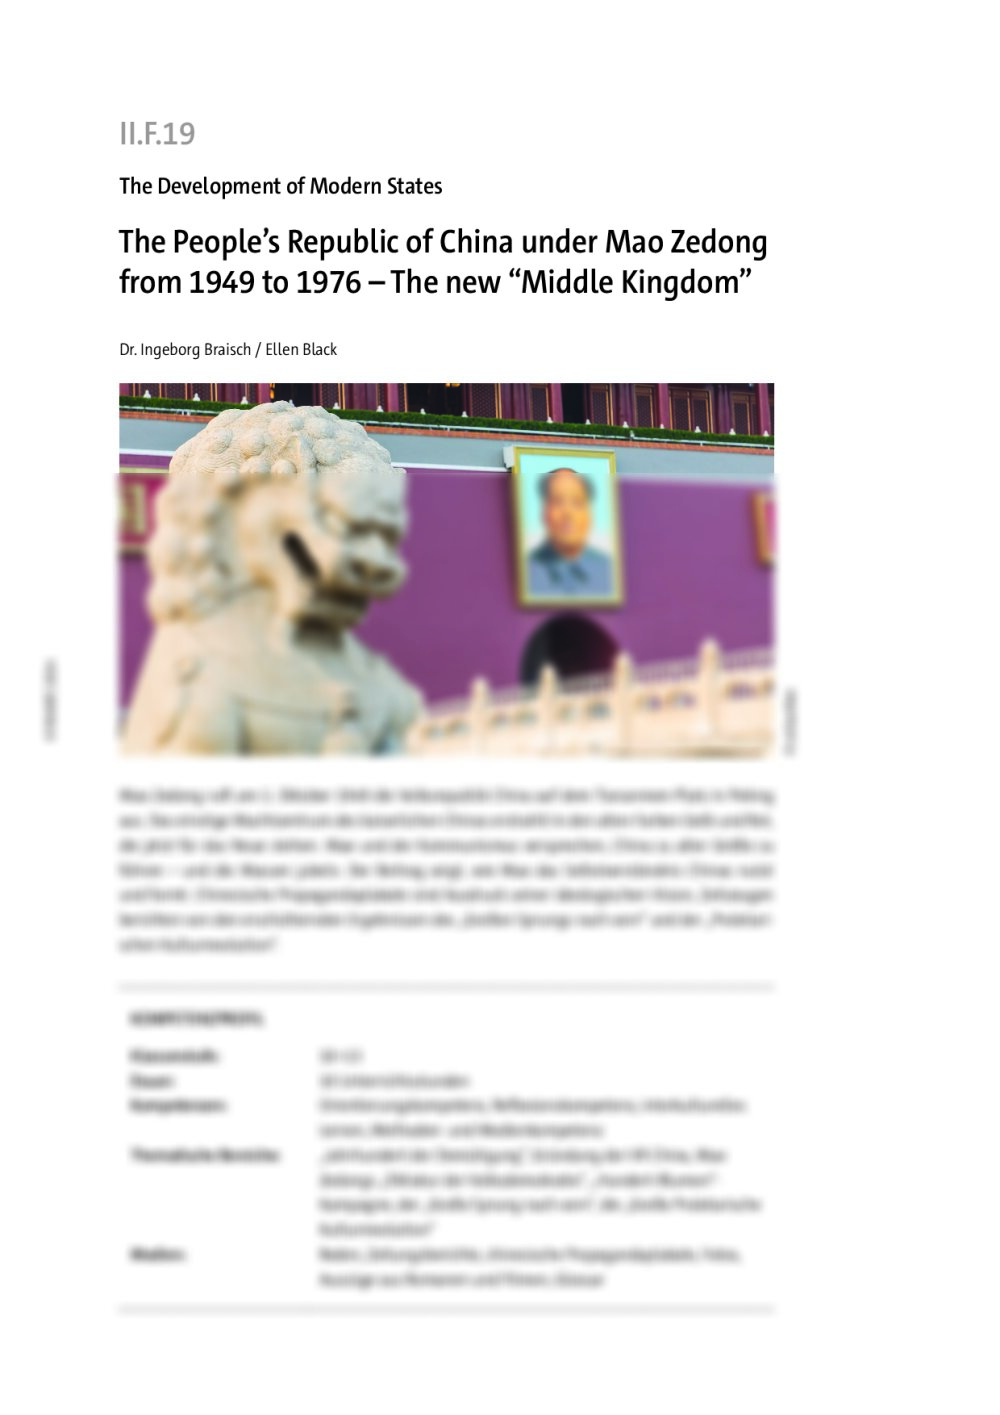 The People's Republic of China under Mao Zedong from 1949 to 1976 - Seite 1